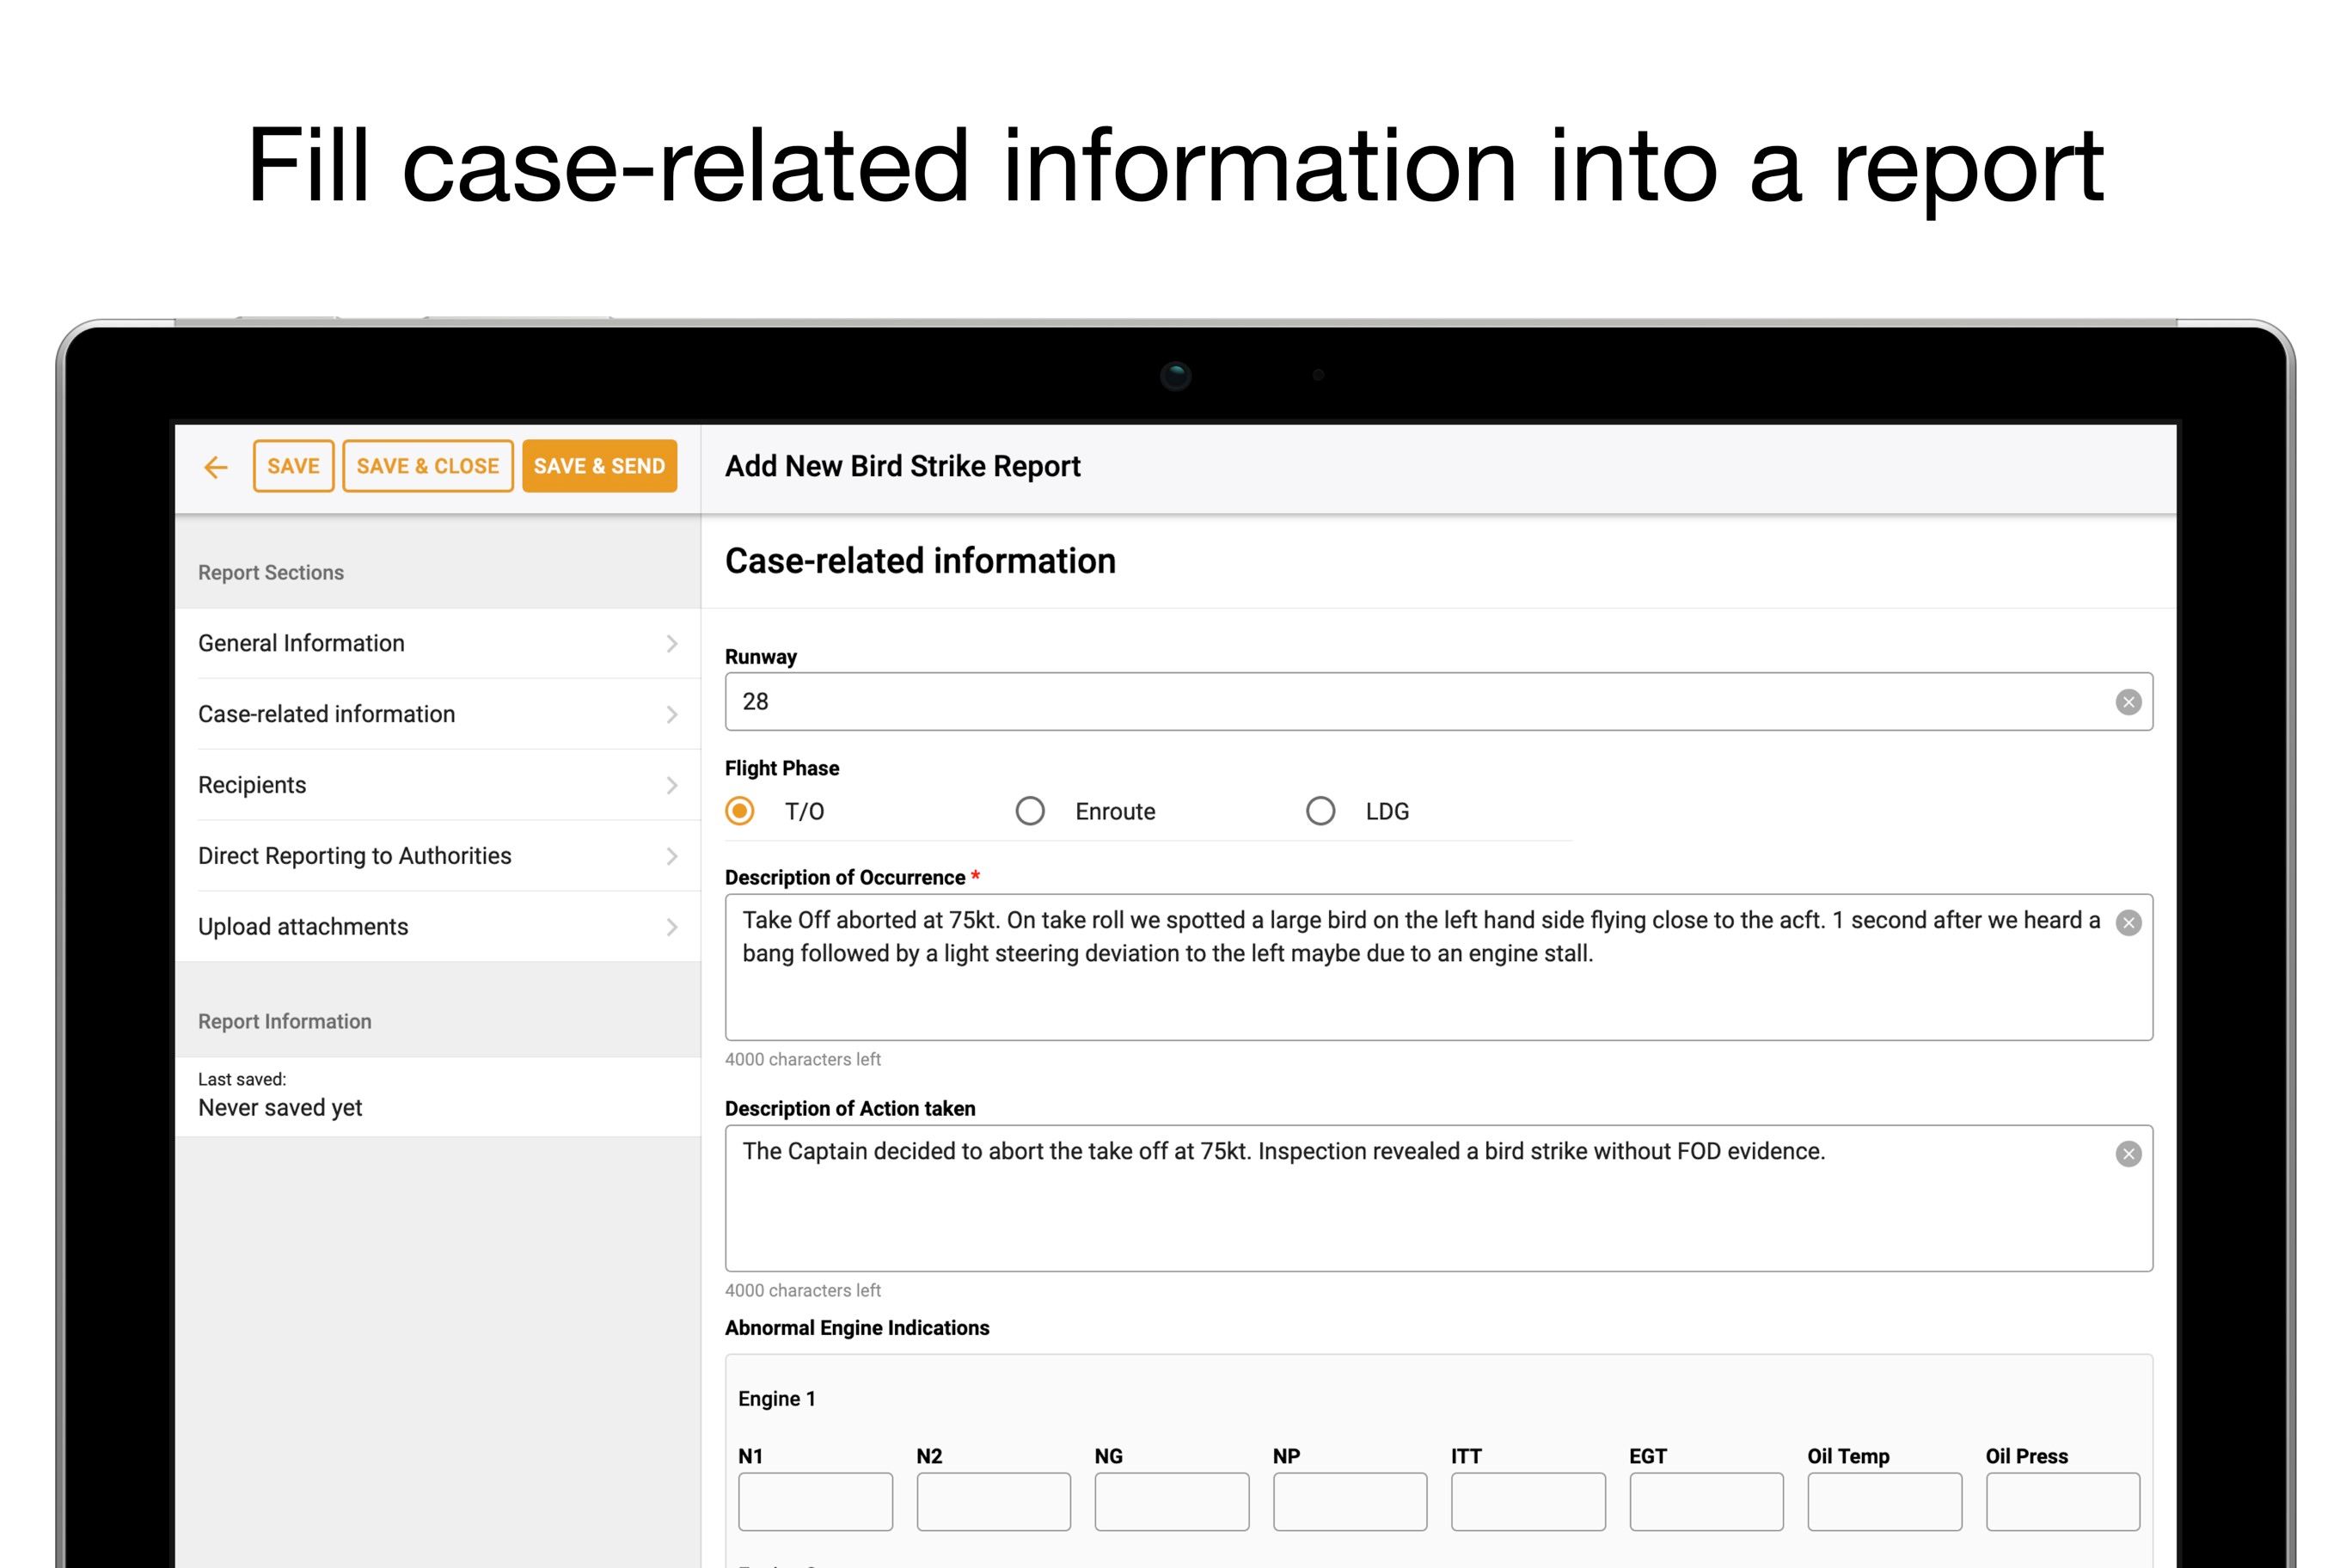 Fill case-related information into a report